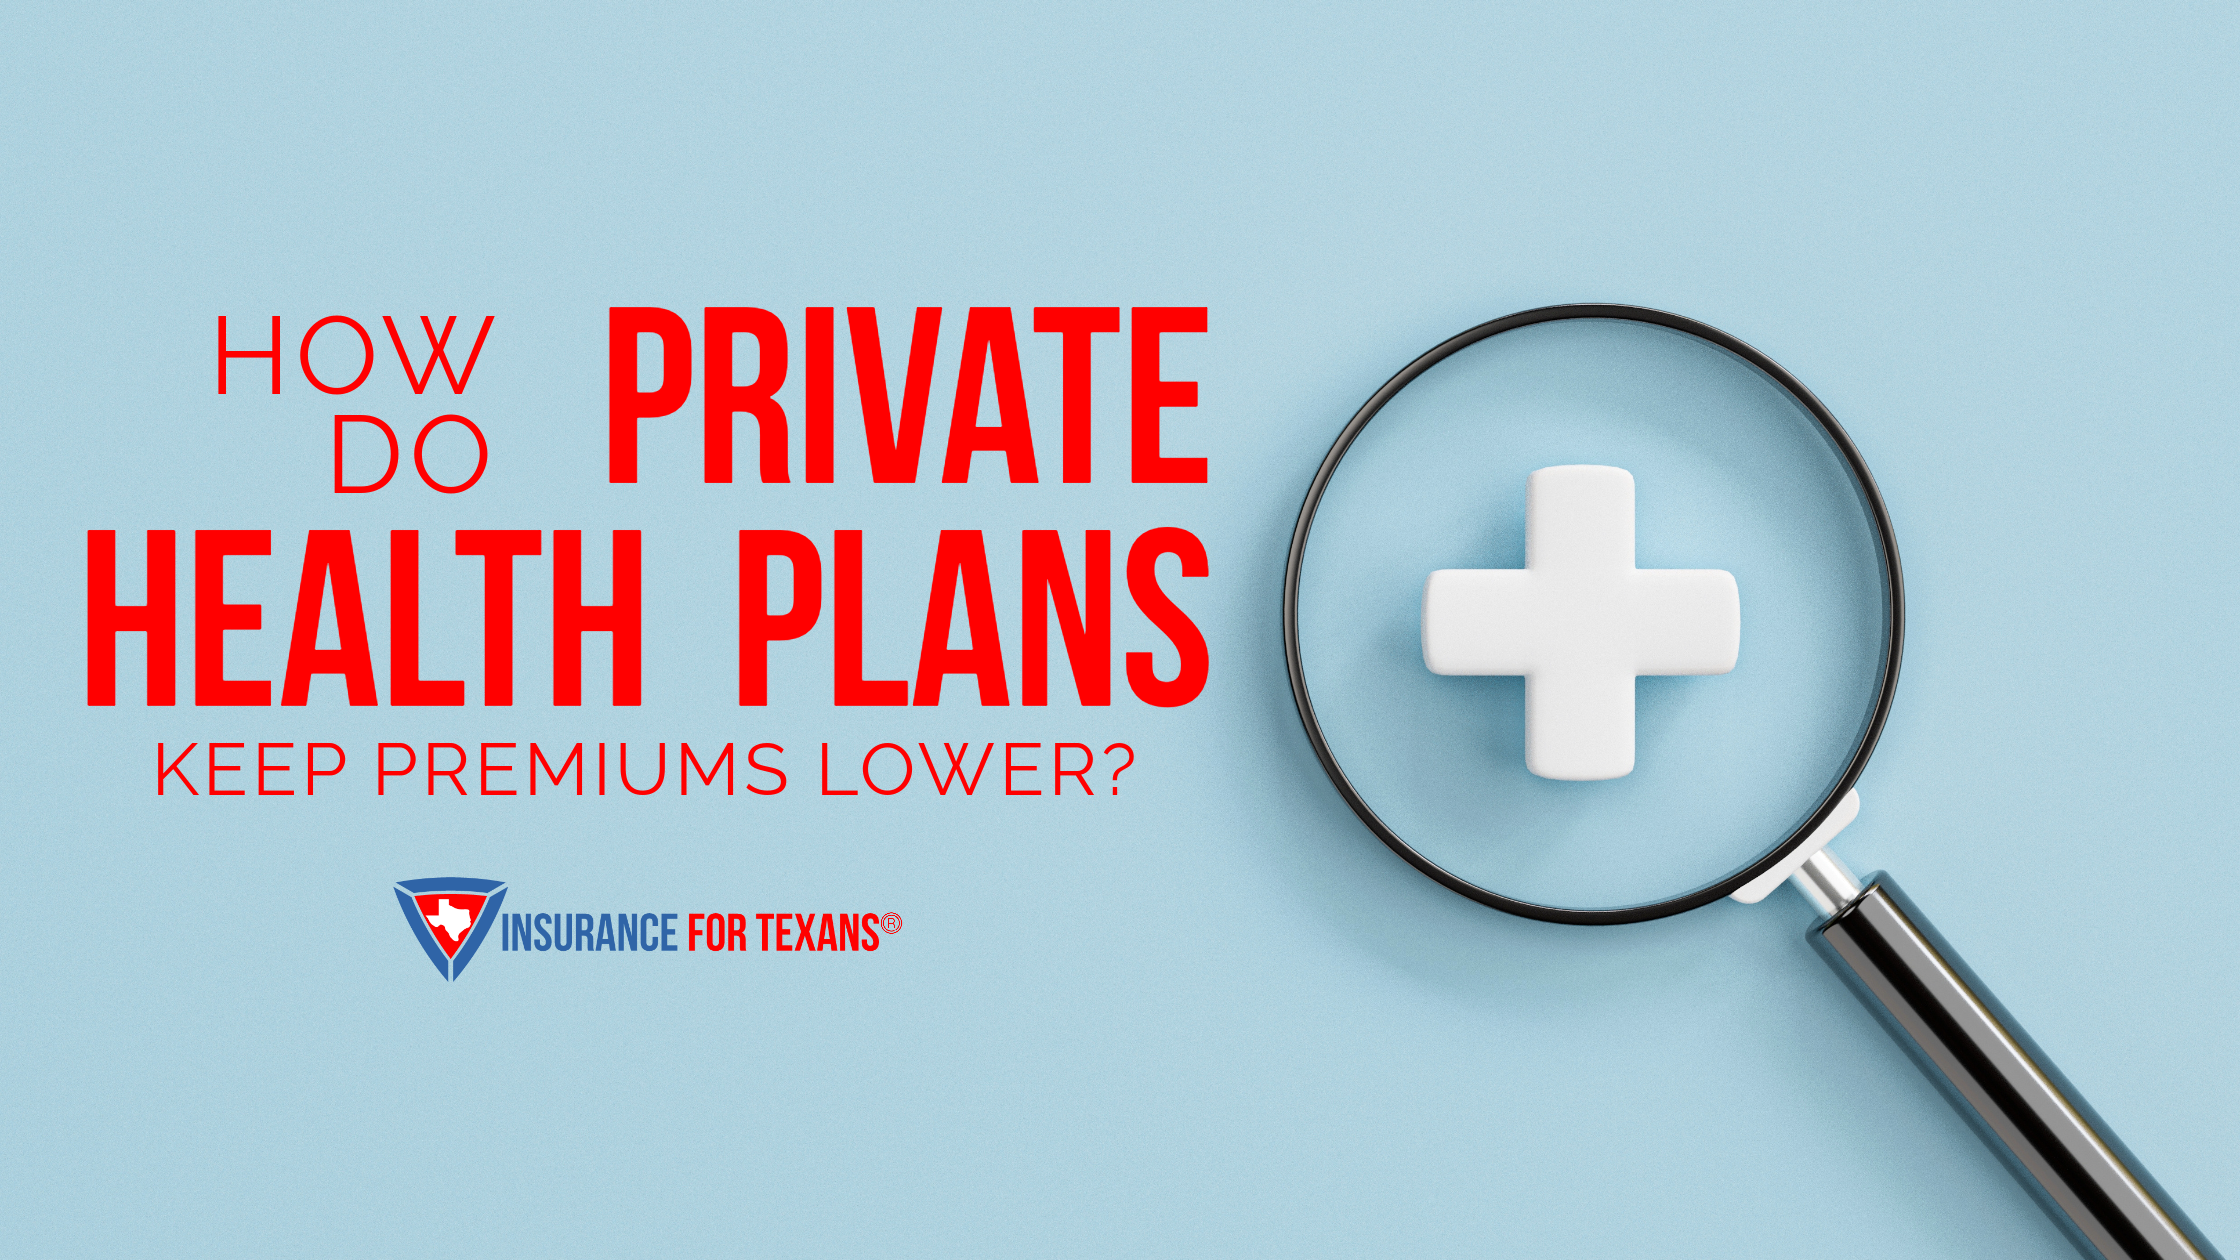 How Do Private Health Plans Keep Premiums Lower?